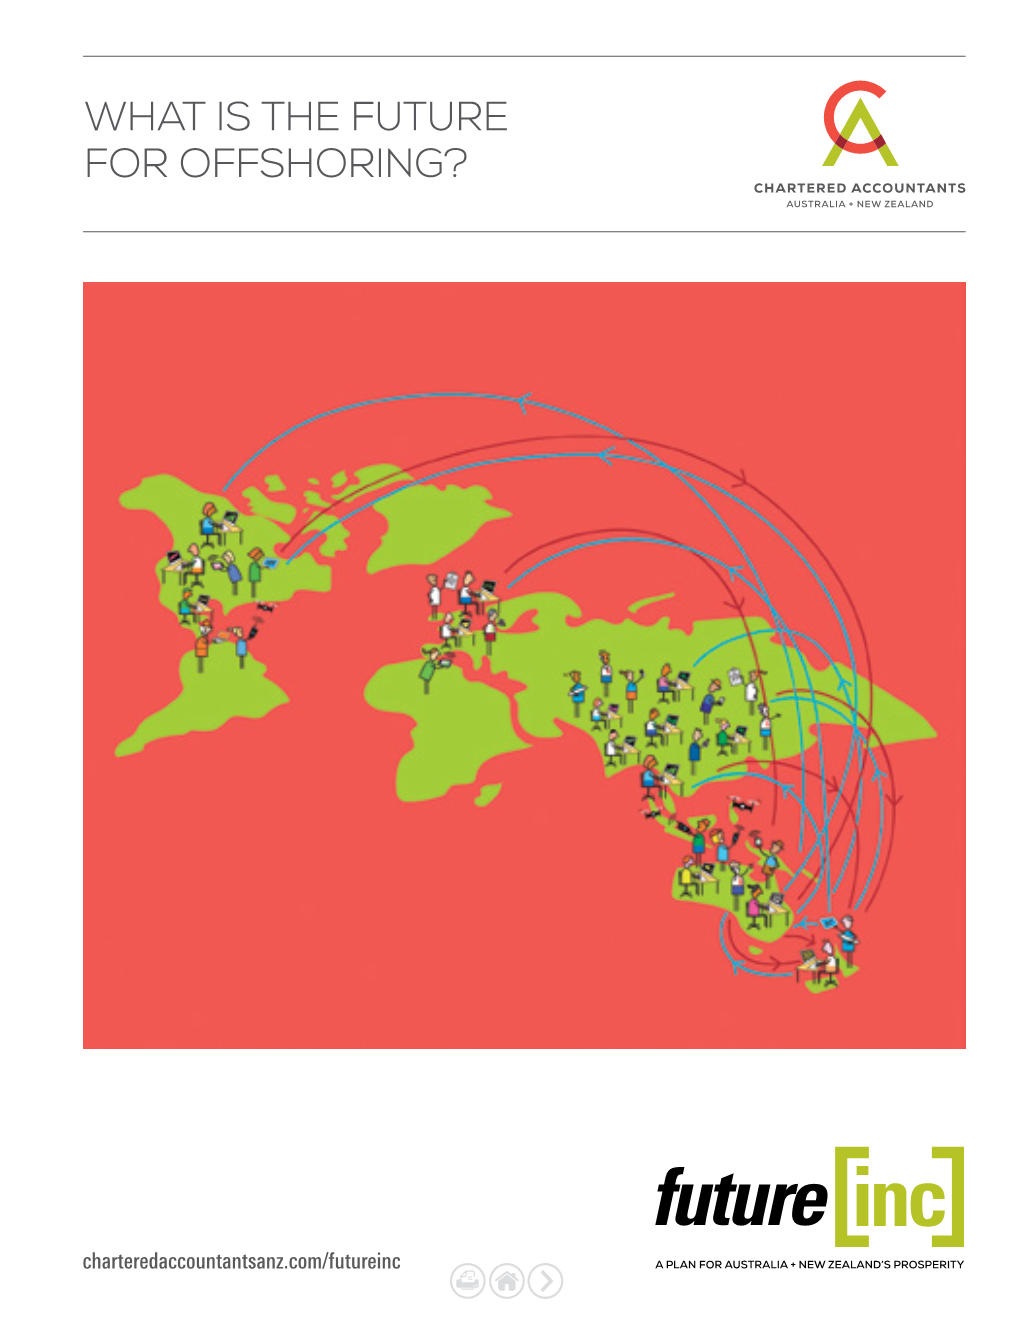 What Is the Future for Offshoring?